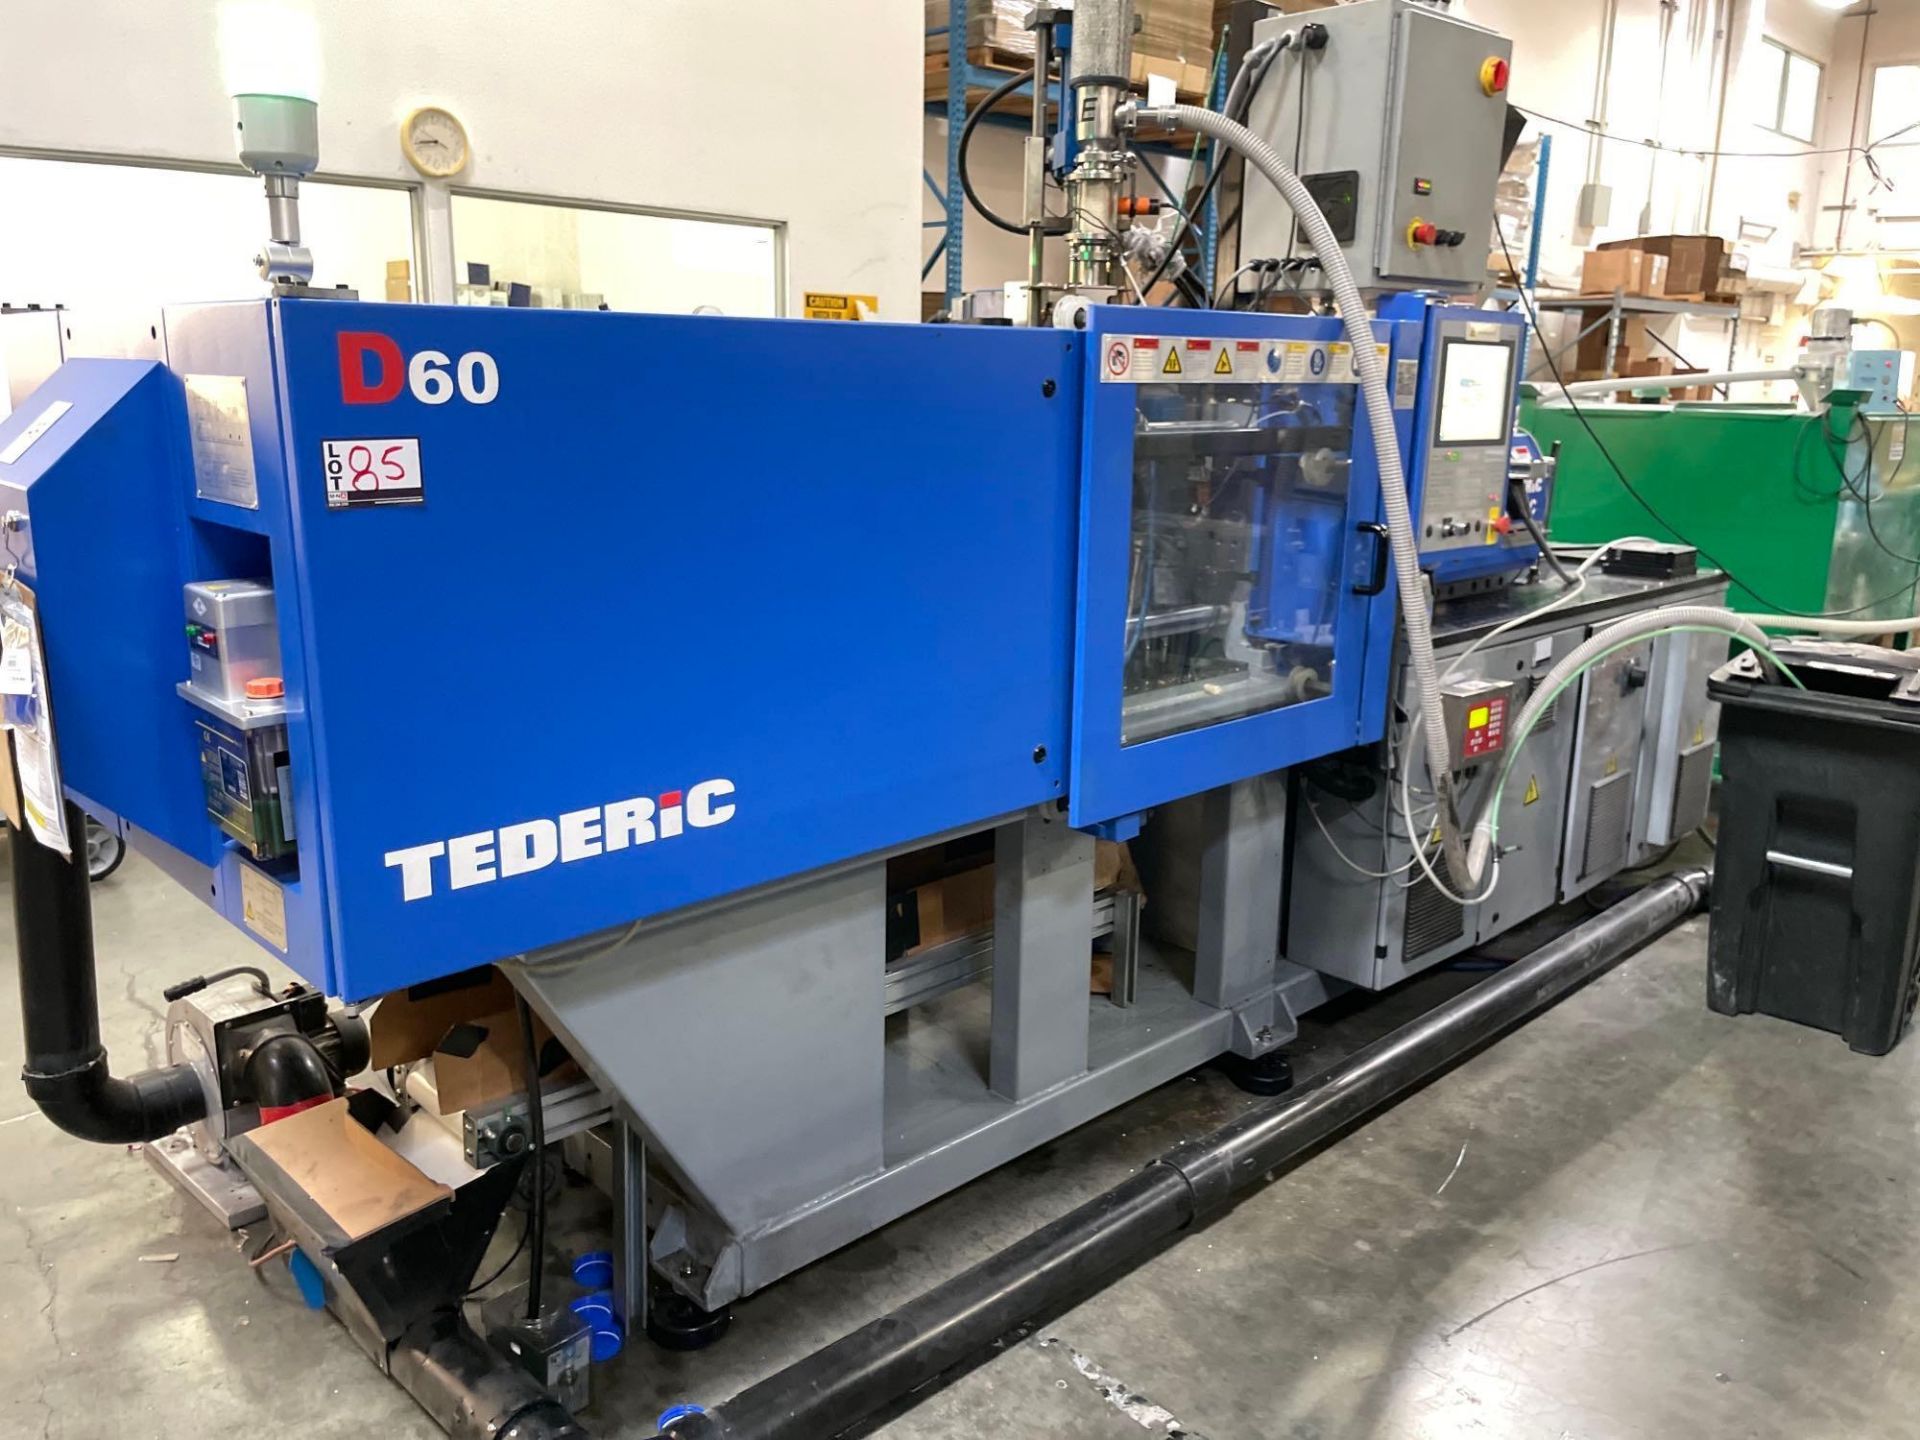 66 Ton Tederic D60 Plastic Injection Molder, Keba 12000 Control, s/n T00800275, New 2020 - Image 5 of 15